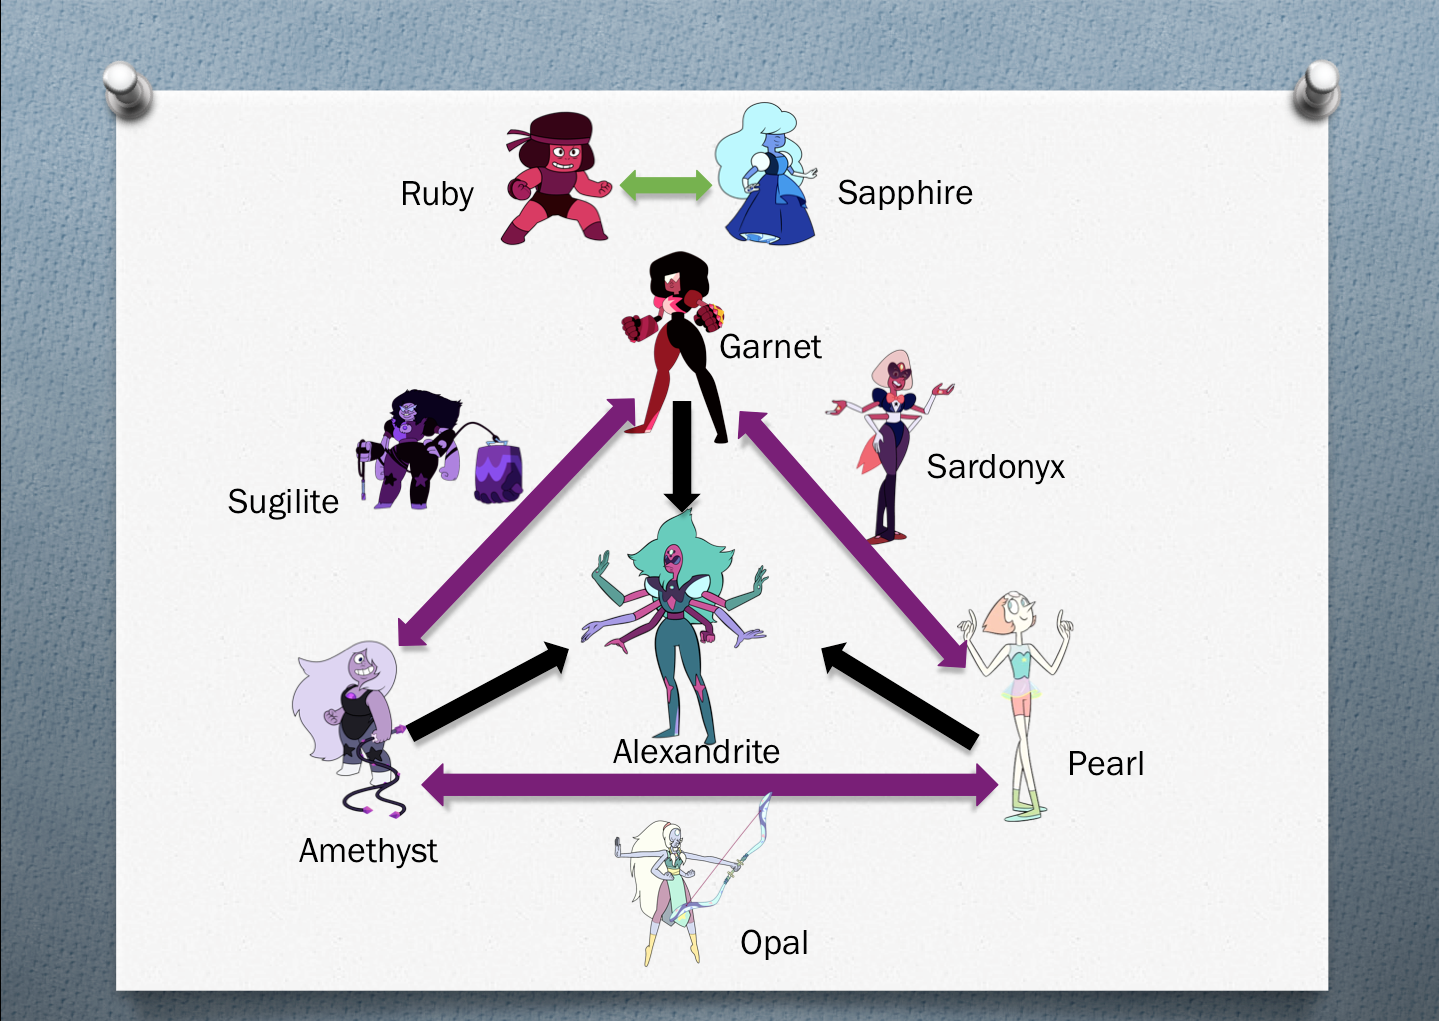 A diagram shows some possible fusions of the Crystal Gems. Ruby and Sapphire are on top. They fuse into Garnet. Beneath Ruby and Sapphire is a triangular formation of how Garnet, Amethyst, and Pearl can fuse. Garnet and Amethyst fuse into Sugilite. Amethyst and Pearl fuse into Opal. Pearl and Garnet fuse into Sardonyx. Garnet, Amethyst, and Pearl fuse into Alexandrite.